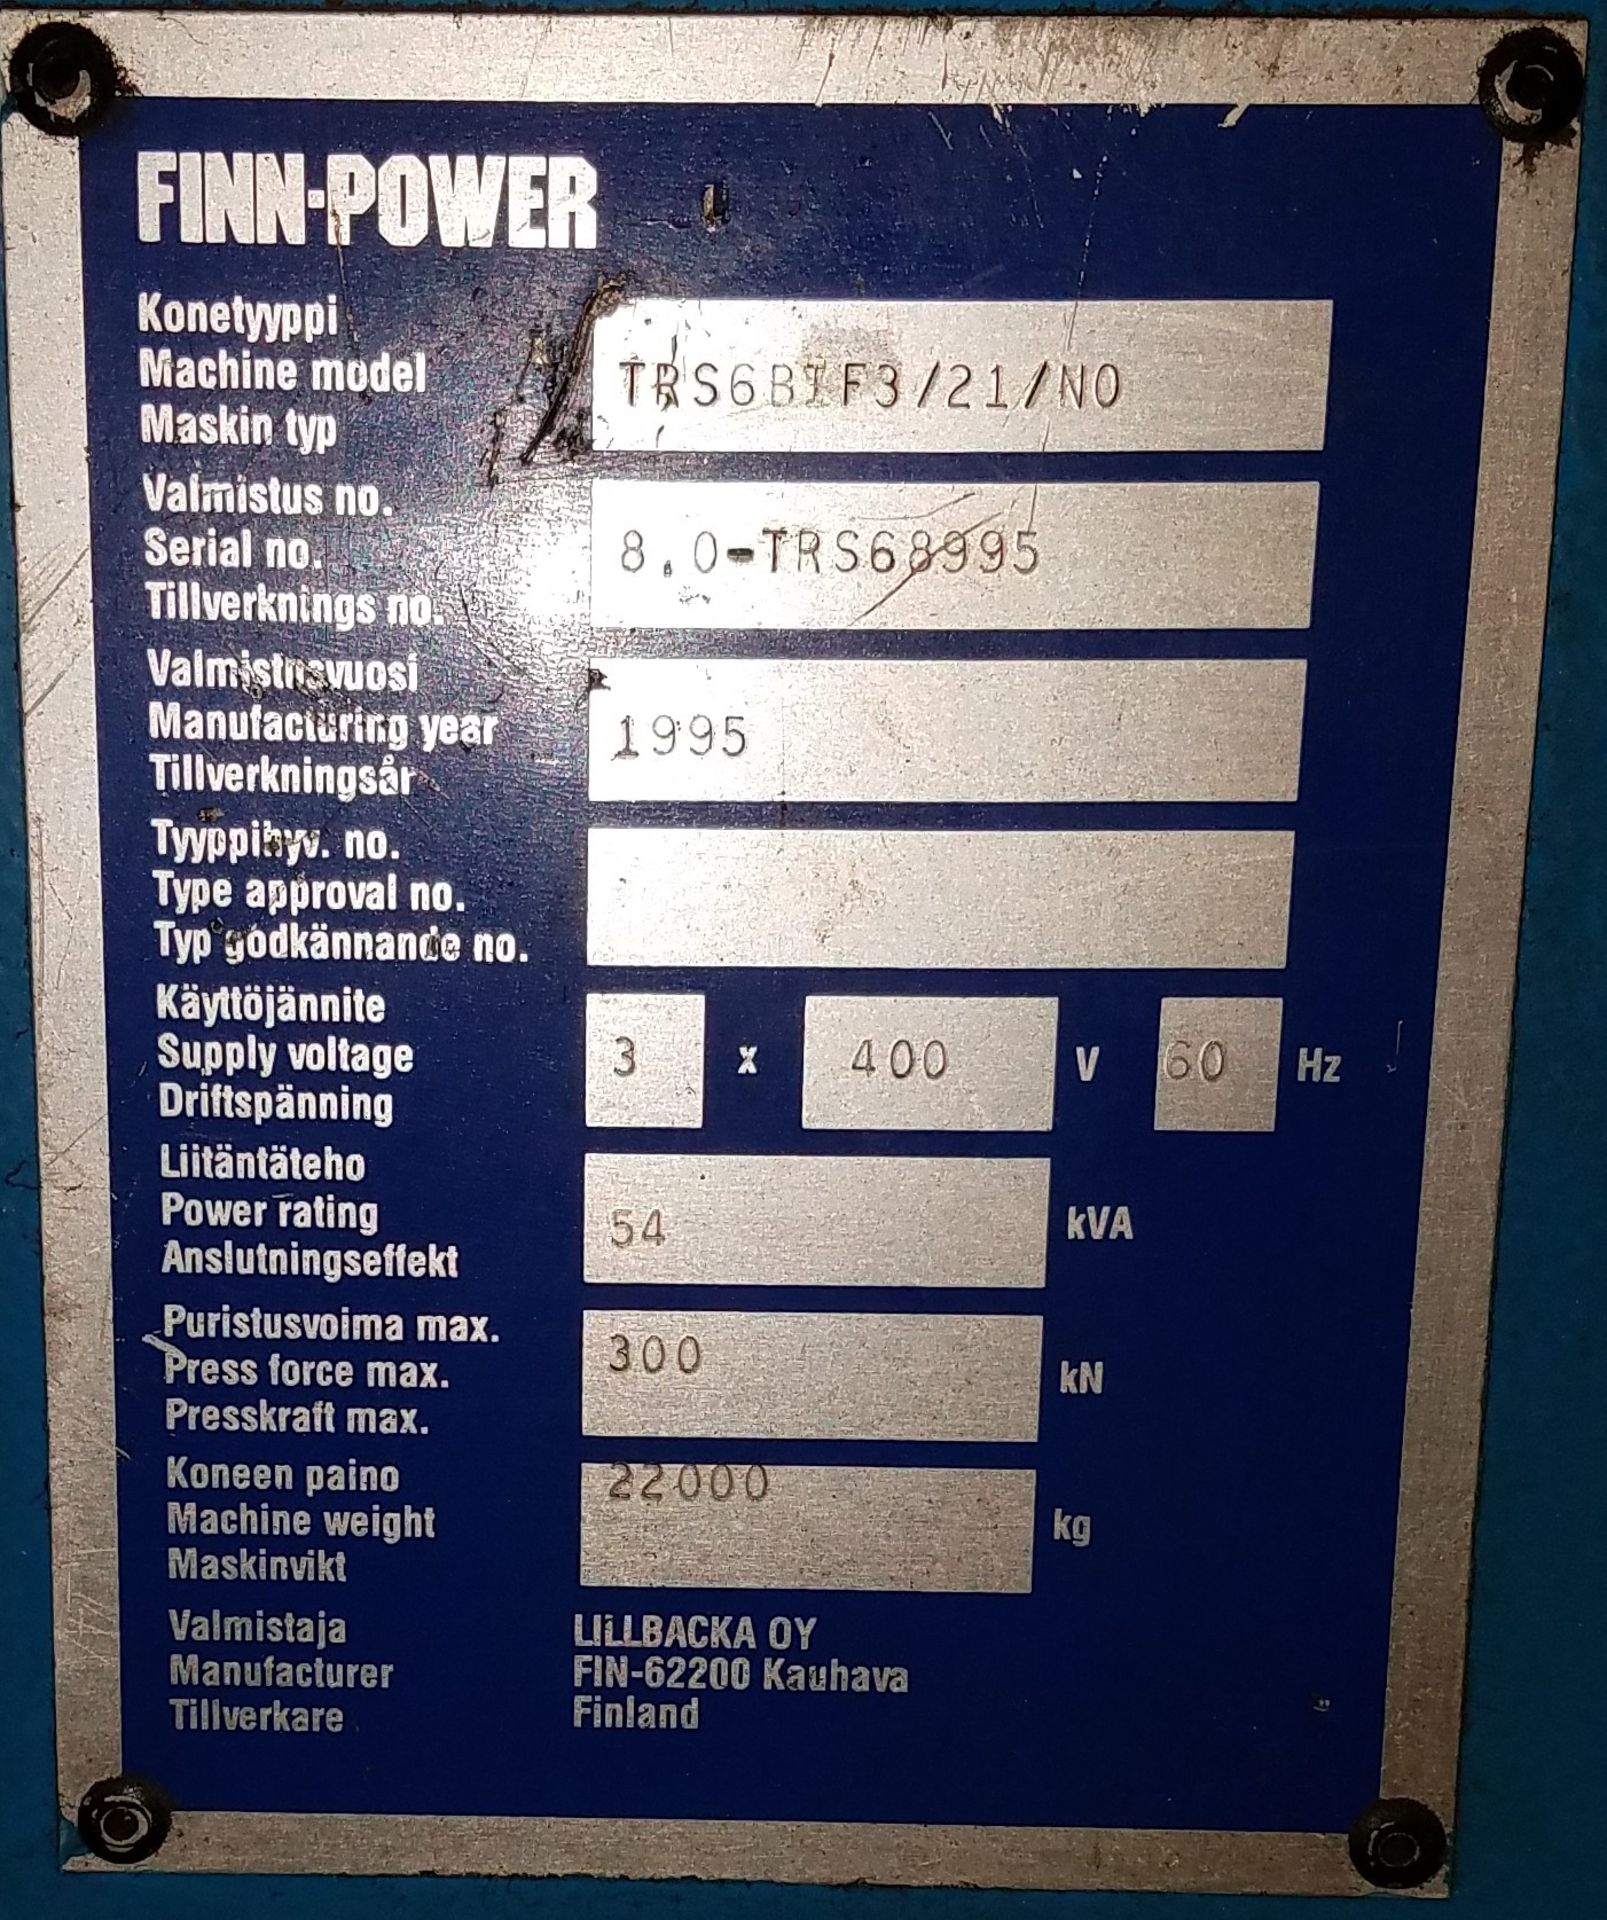 1995 FINN POWER 400V/60HZ/3PH MAX FORCE 300 MACHINE WEIGHT-22000 KG (Located at: 6801 Industrial - Image 2 of 5